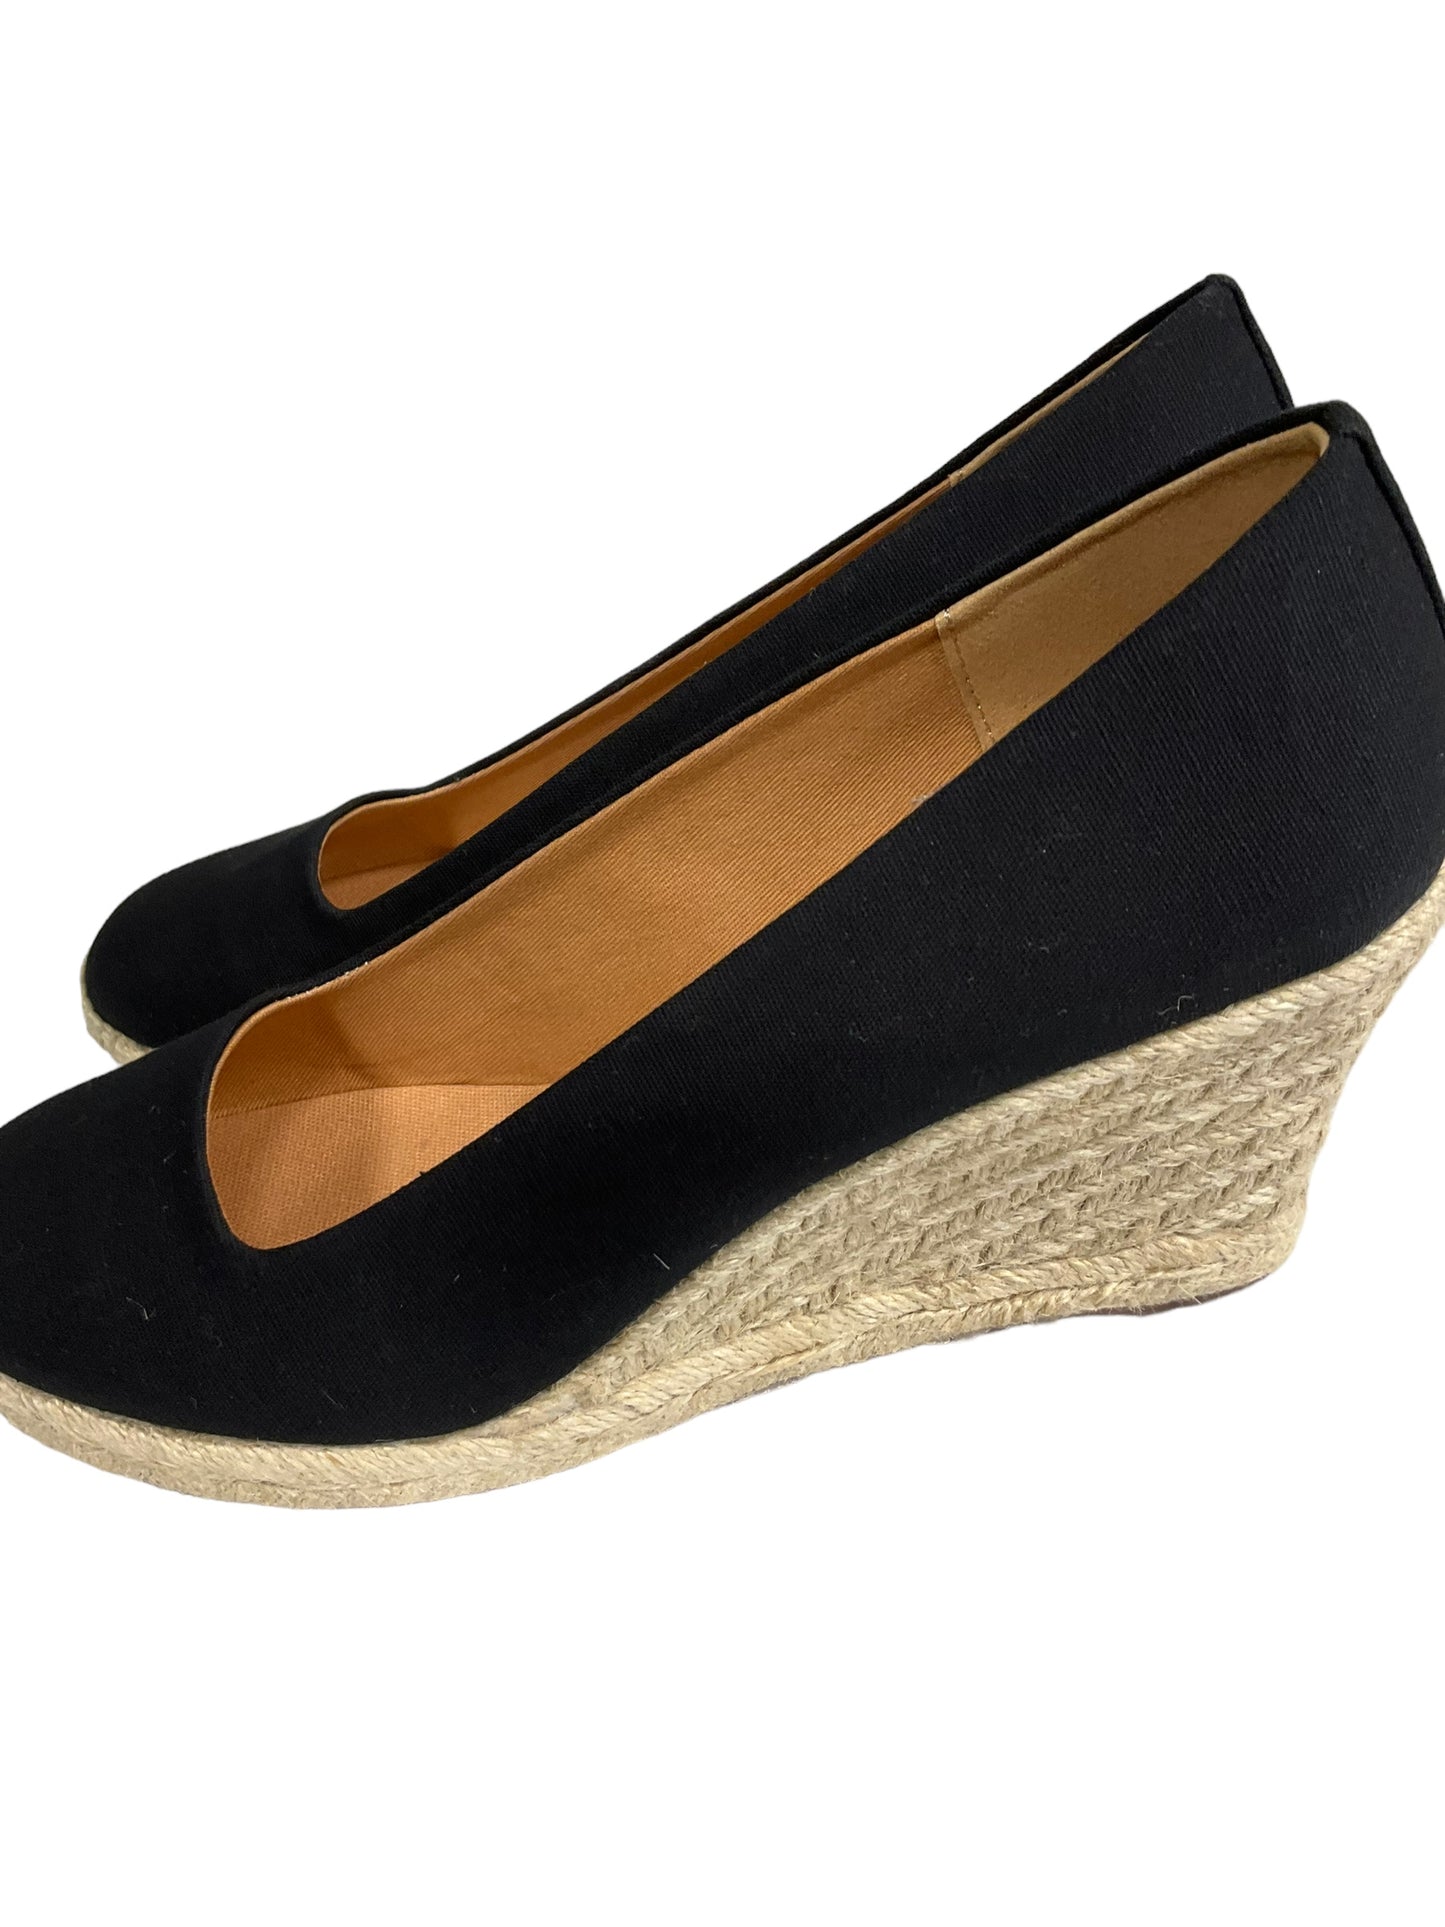 Shoes Heels Wedge By J. Crew  Size: 9.5